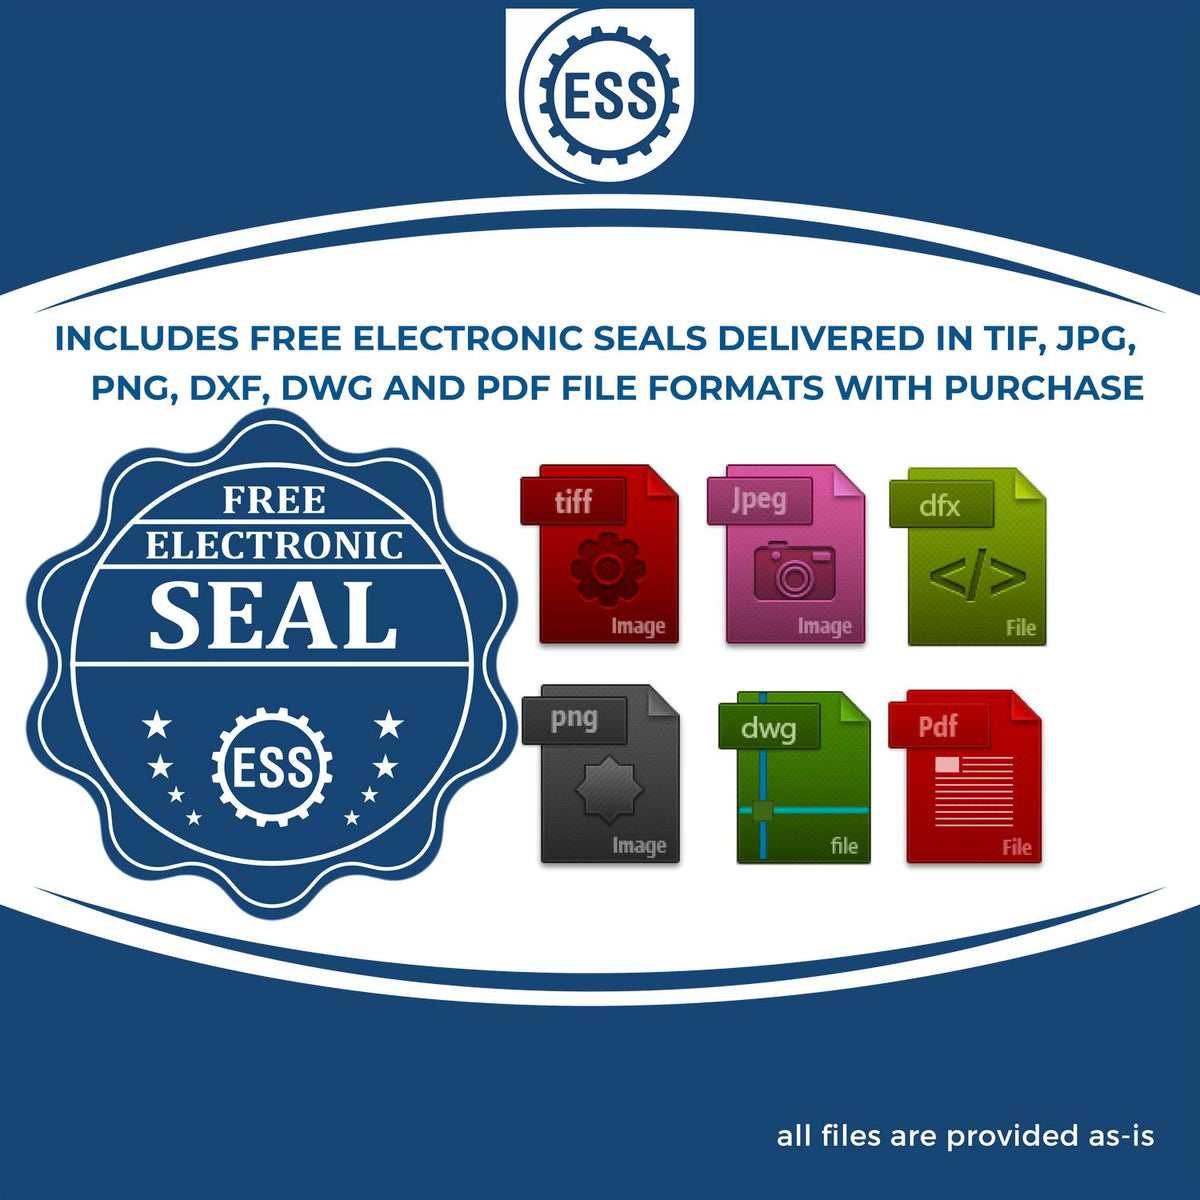 An infographic for the free electronic seal for the PSI Ohio Notary Stamp illustrating the different file type icons such as DXF, DWG, TIF, JPG and PNG.